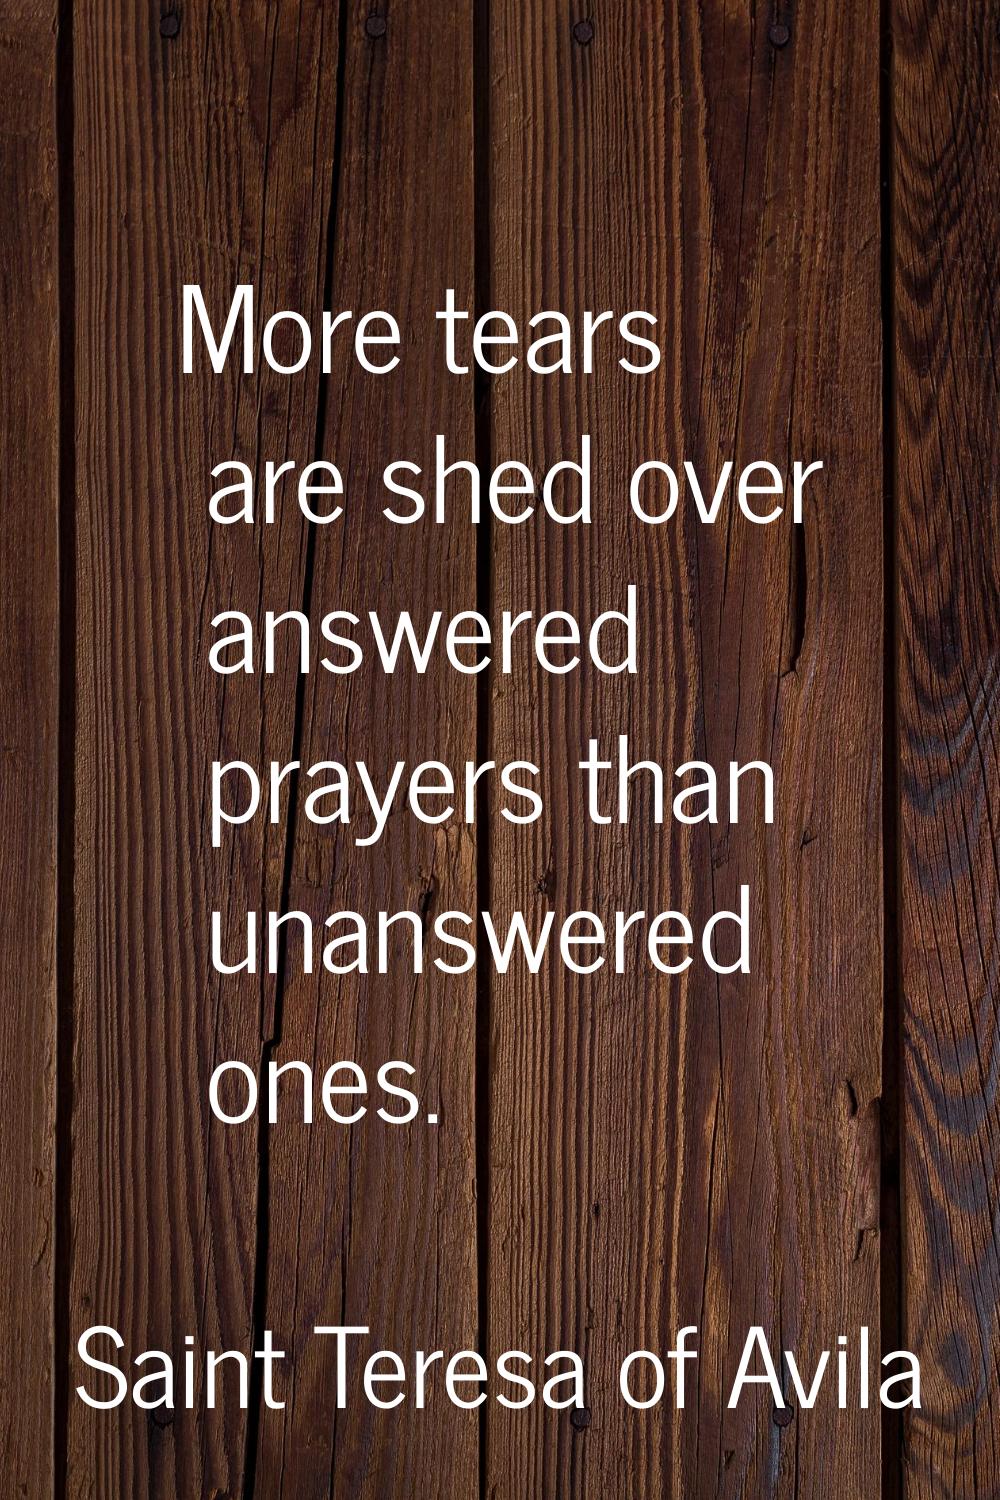 More tears are shed over answered prayers than unanswered ones.